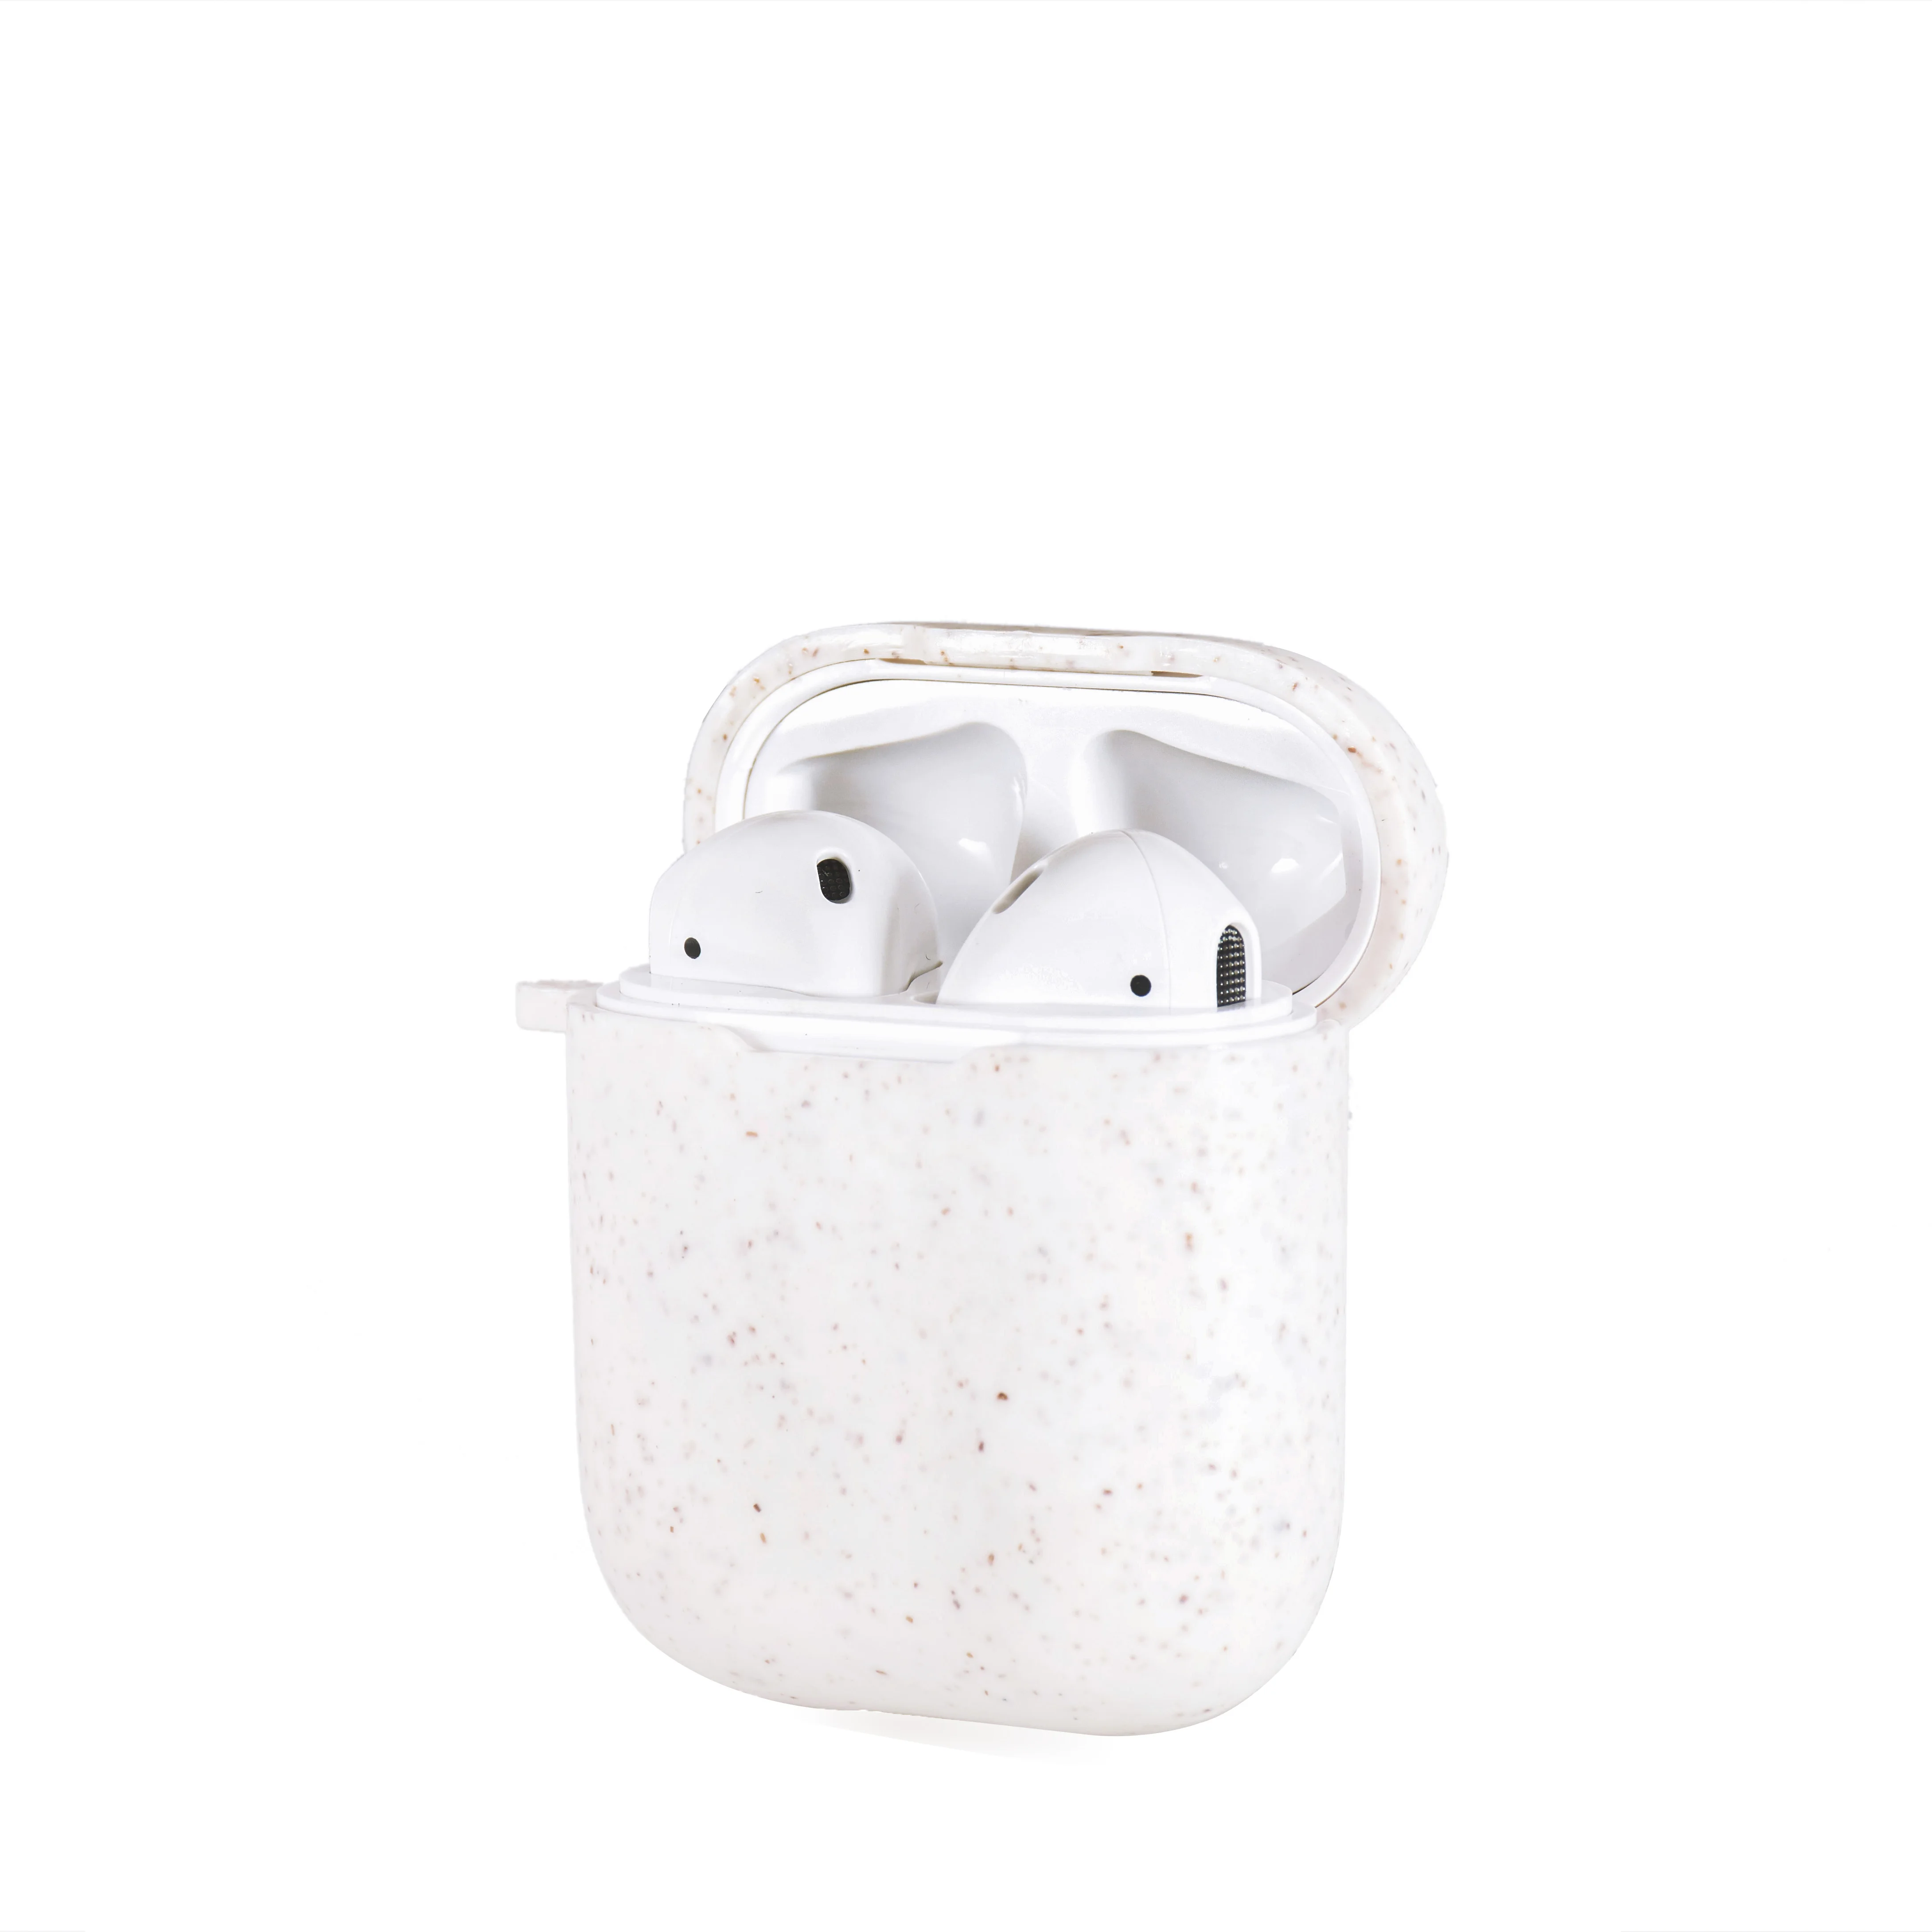 

Hot Selling Rpet Degrade Waste Recycling Sustainable Product Airpod Pro 3 Case, Beige ,green ,pink, purple or pms color